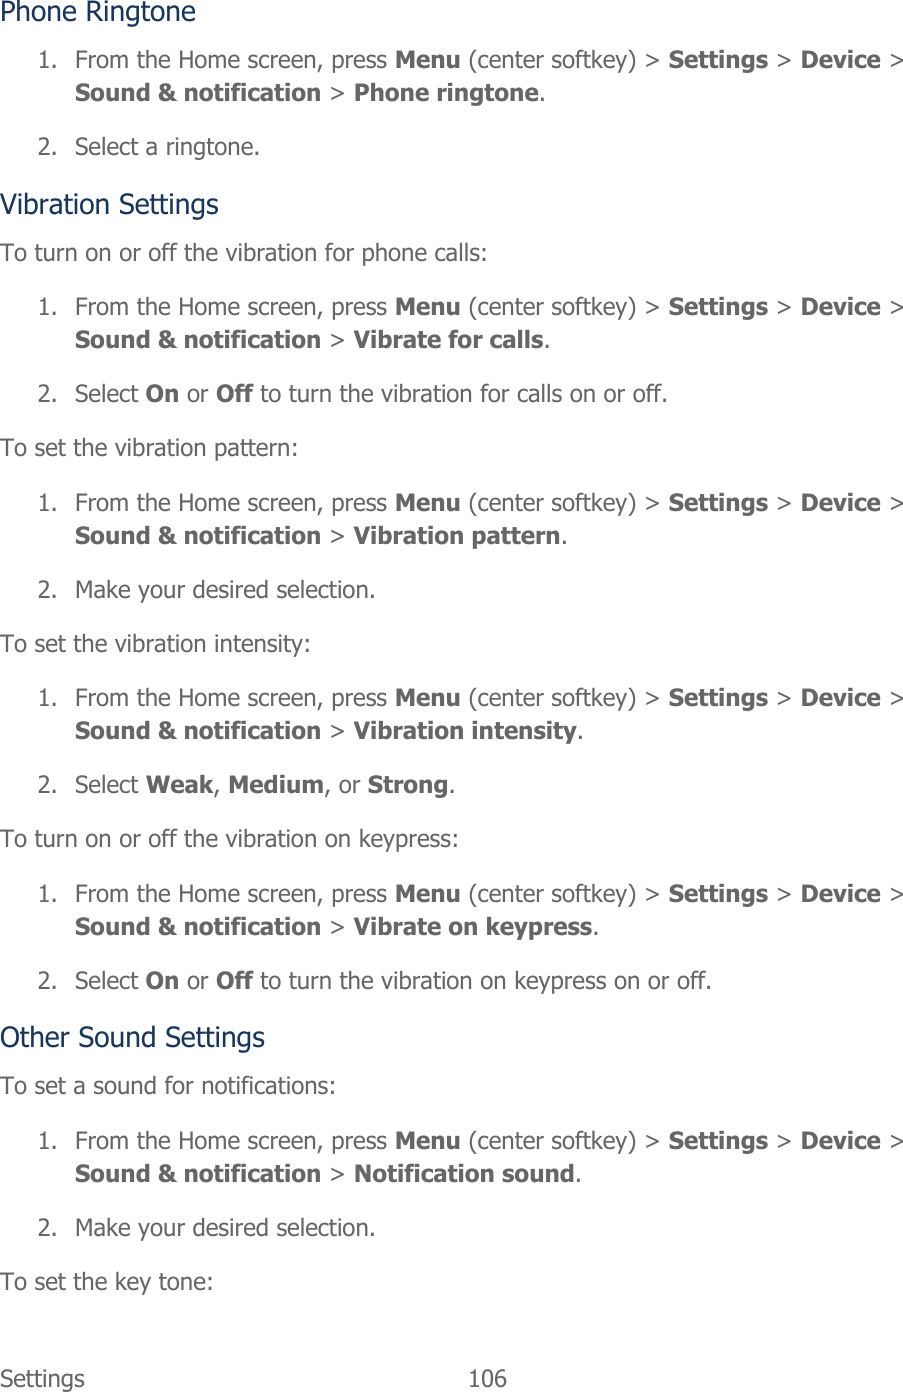  Settings  106   Phone Ringtone 1. From the Home screen, press Menu (center softkey) &gt; Settings &gt; Device &gt; Sound &amp; notification &gt; Phone ringtone. 2. Select a ringtone. Vibration Settings To turn on or off the vibration for phone calls: 1. From the Home screen, press Menu (center softkey) &gt; Settings &gt; Device &gt; Sound &amp; notification &gt; Vibrate for calls. 2. Select On or Off to turn the vibration for calls on or off. To set the vibration pattern: 1. From the Home screen, press Menu (center softkey) &gt; Settings &gt; Device &gt; Sound &amp; notification &gt; Vibration pattern. 2. Make your desired selection. To set the vibration intensity: 1. From the Home screen, press Menu (center softkey) &gt; Settings &gt; Device &gt; Sound &amp; notification &gt; Vibration intensity. 2. Select Weak, Medium, or Strong. To turn on or off the vibration on keypress: 1. From the Home screen, press Menu (center softkey) &gt; Settings &gt; Device &gt; Sound &amp; notification &gt; Vibrate on keypress. 2. Select On or Off to turn the vibration on keypress on or off. Other Sound Settings To set a sound for notifications: 1. From the Home screen, press Menu (center softkey) &gt; Settings &gt; Device &gt; Sound &amp; notification &gt; Notification sound. 2. Make your desired selection. To set the key tone: 